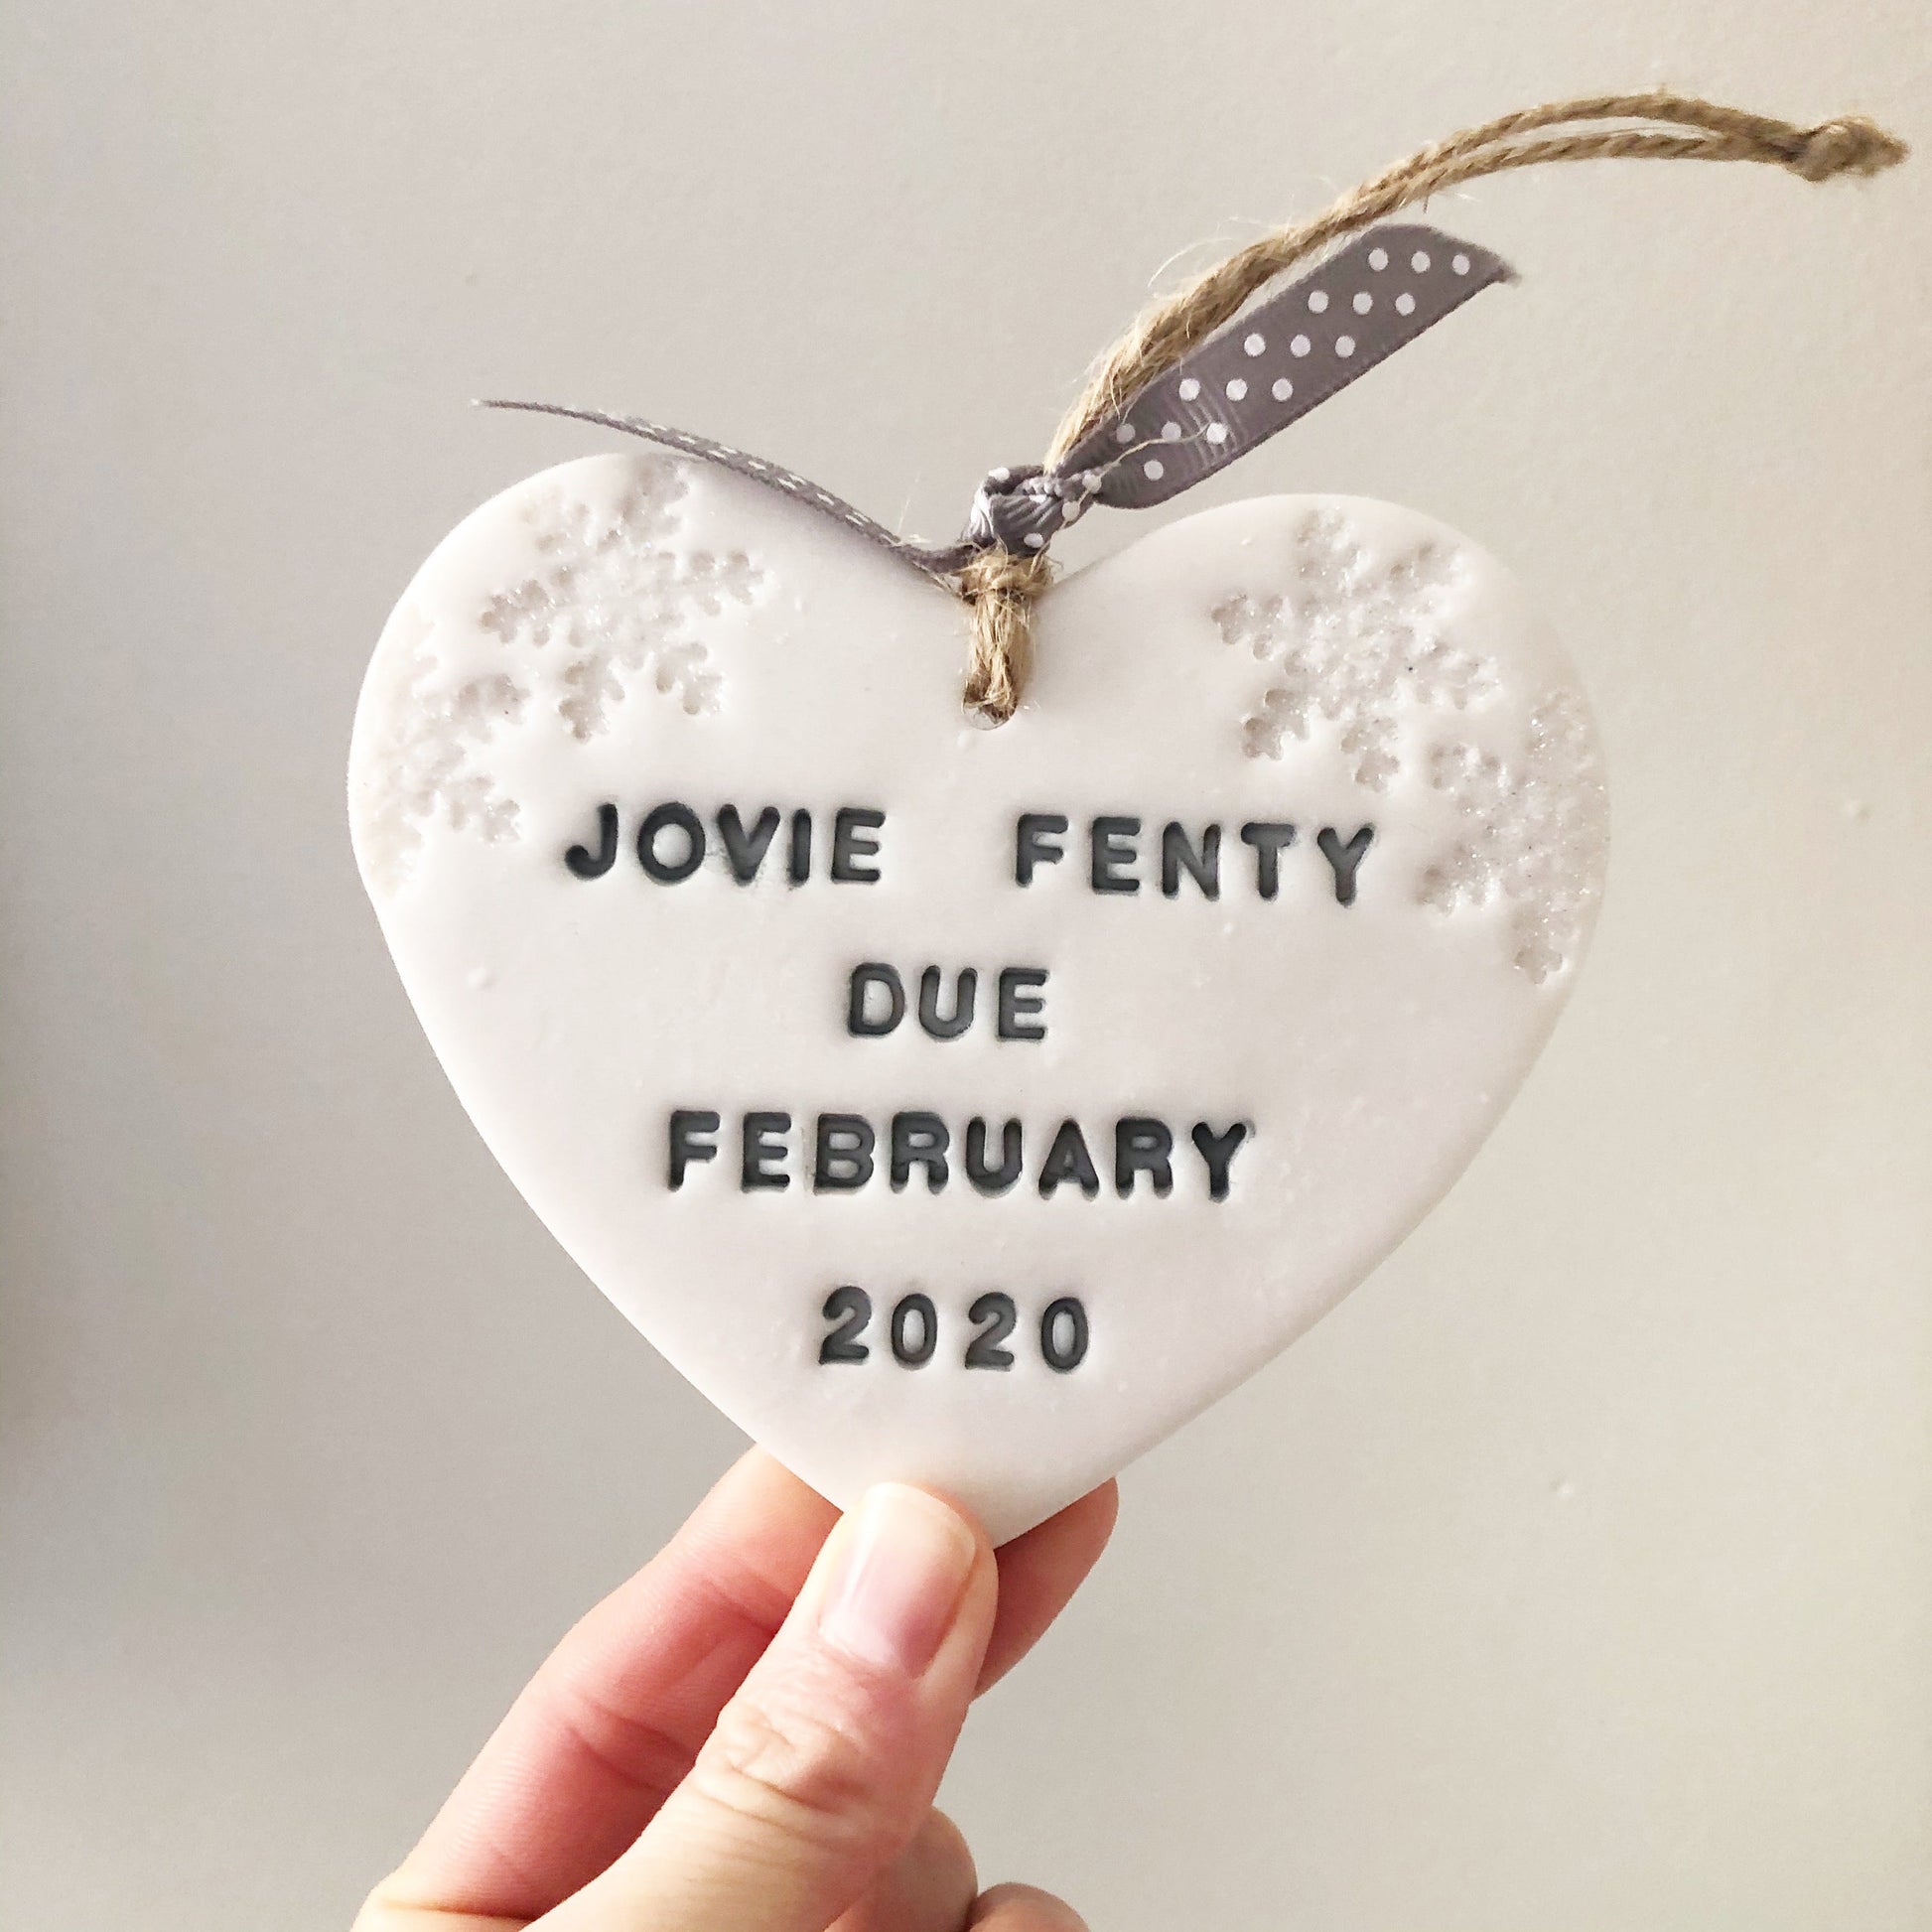 Personalised baby's first Christmas heart ornament, pearlised white clay with JOVIE FENTY DUE FEBRUARY 2020 painted grey, decorated with 2 iridescent glitter snowflakes on either side of the top of the heart